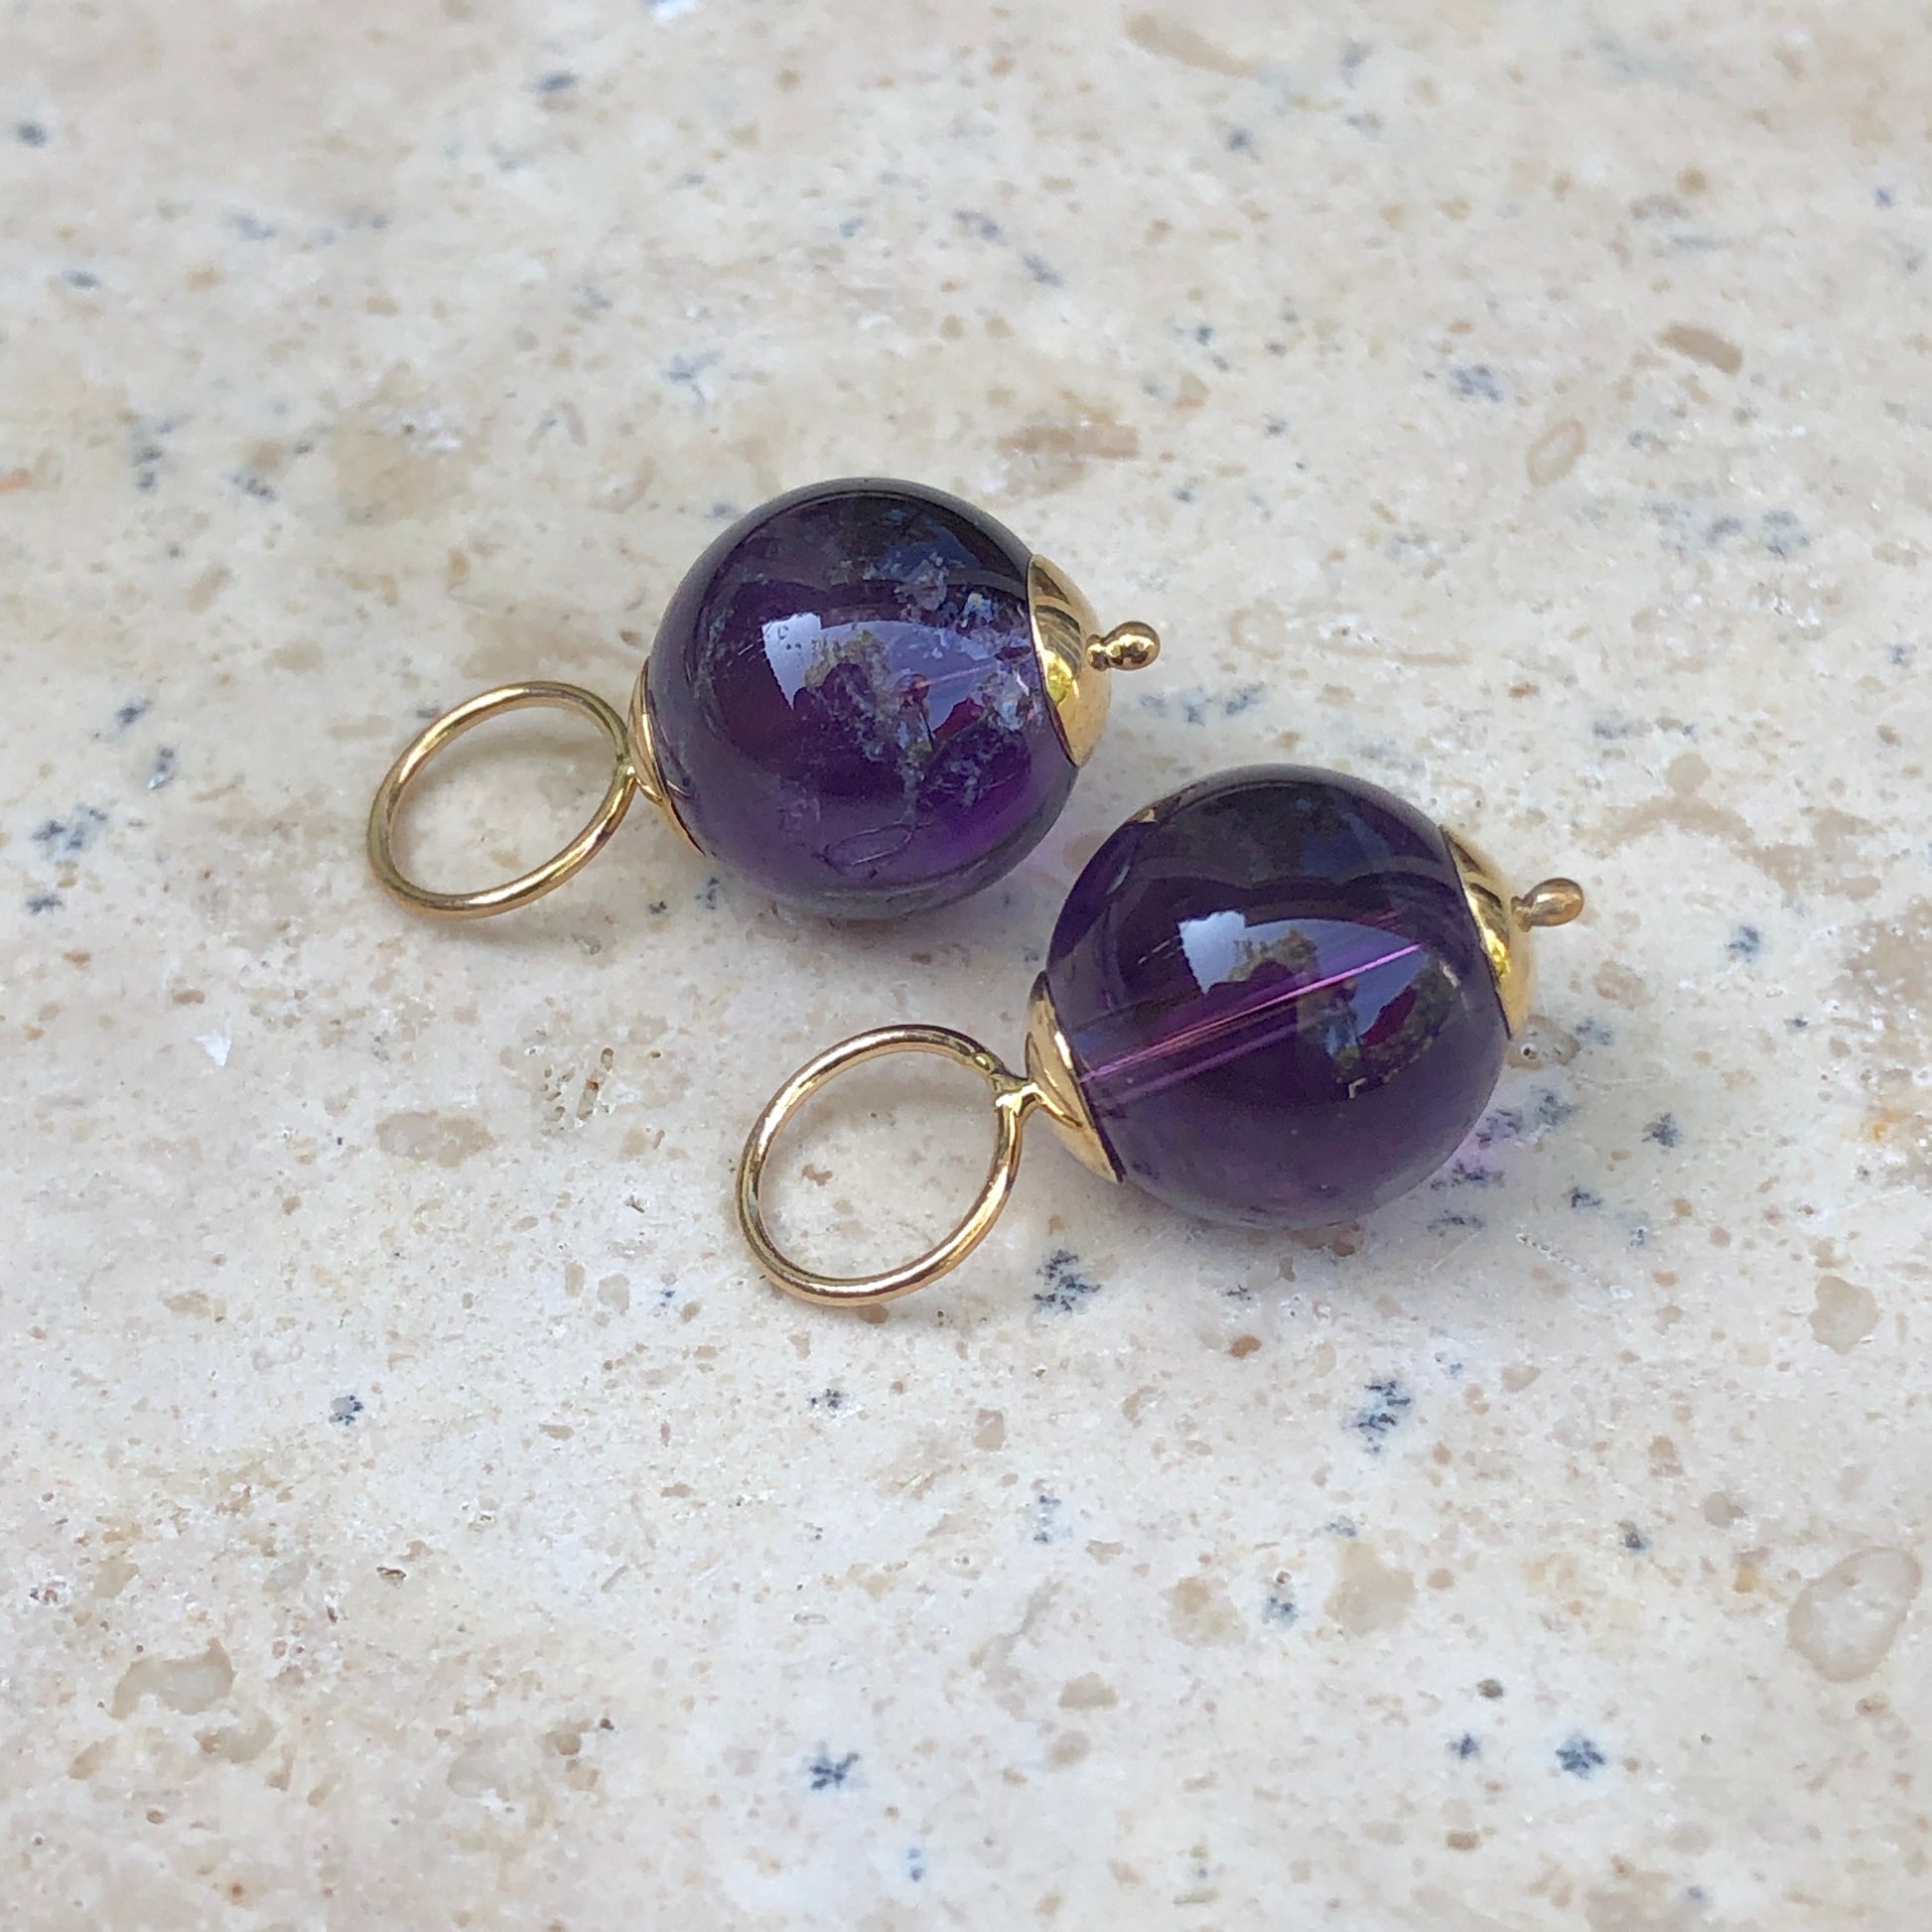 14KT Yellow Gold + Amethyst Ball Earring Charms, 14KT Yellow Gold + Amethyst Ball Earring Charms - Legacy Saint Jewelry